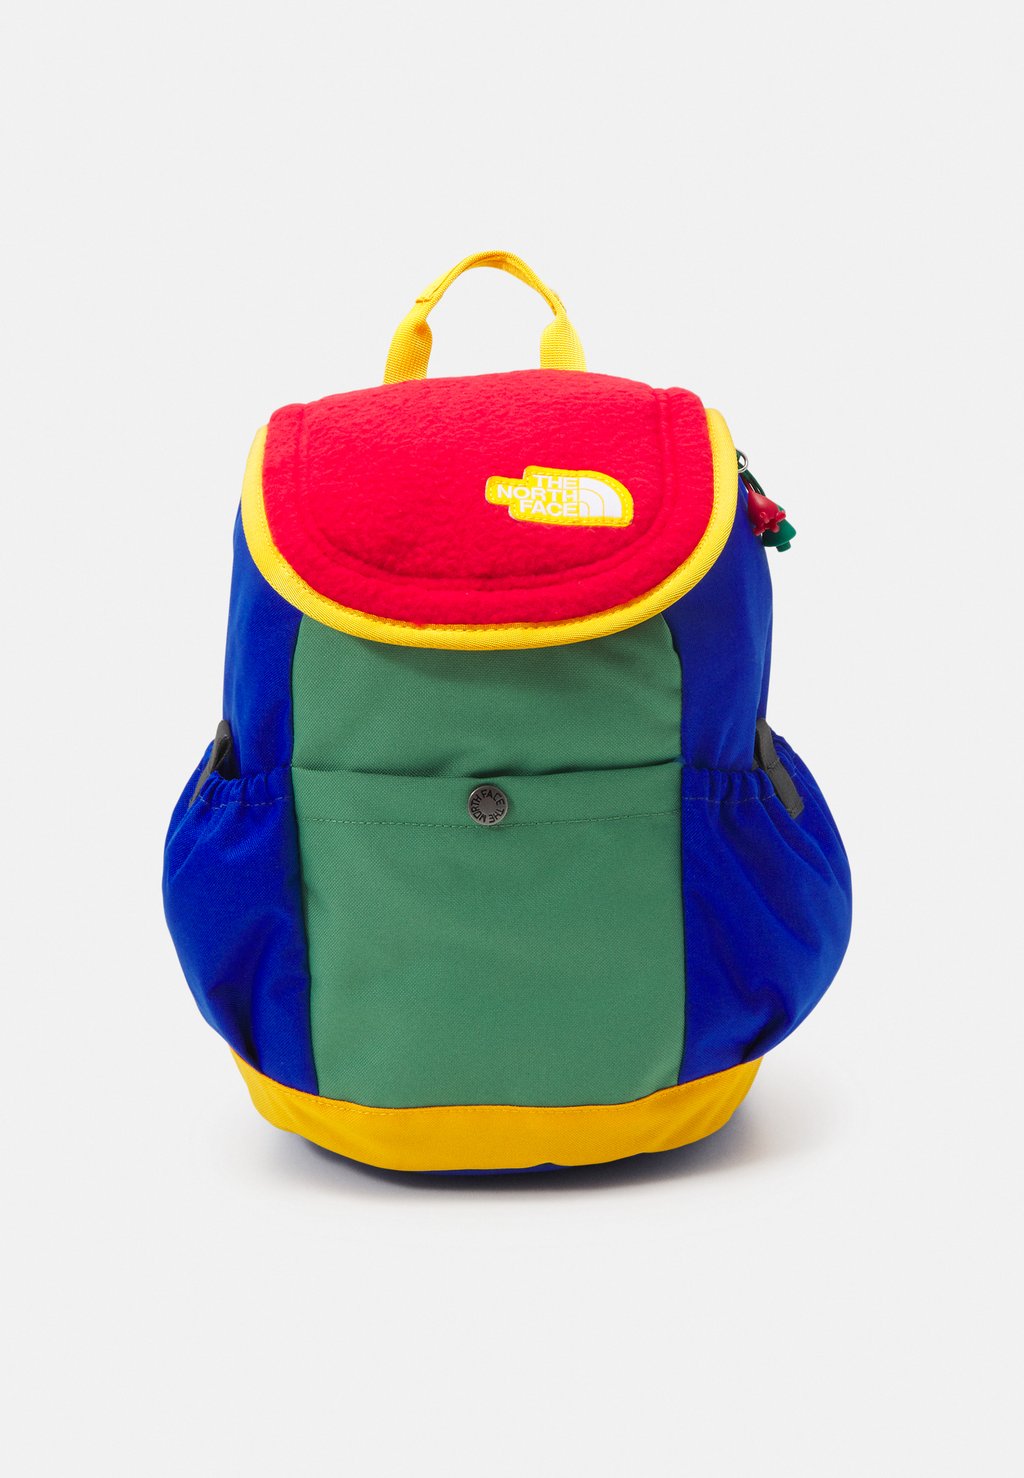 Рюкзак Mini Explorer Unisex The North Face, цвет tnf red-deep grass green/tnf blue/summit gold plastic sword stage performance weapons shangfang sword children s toy gold green blue red